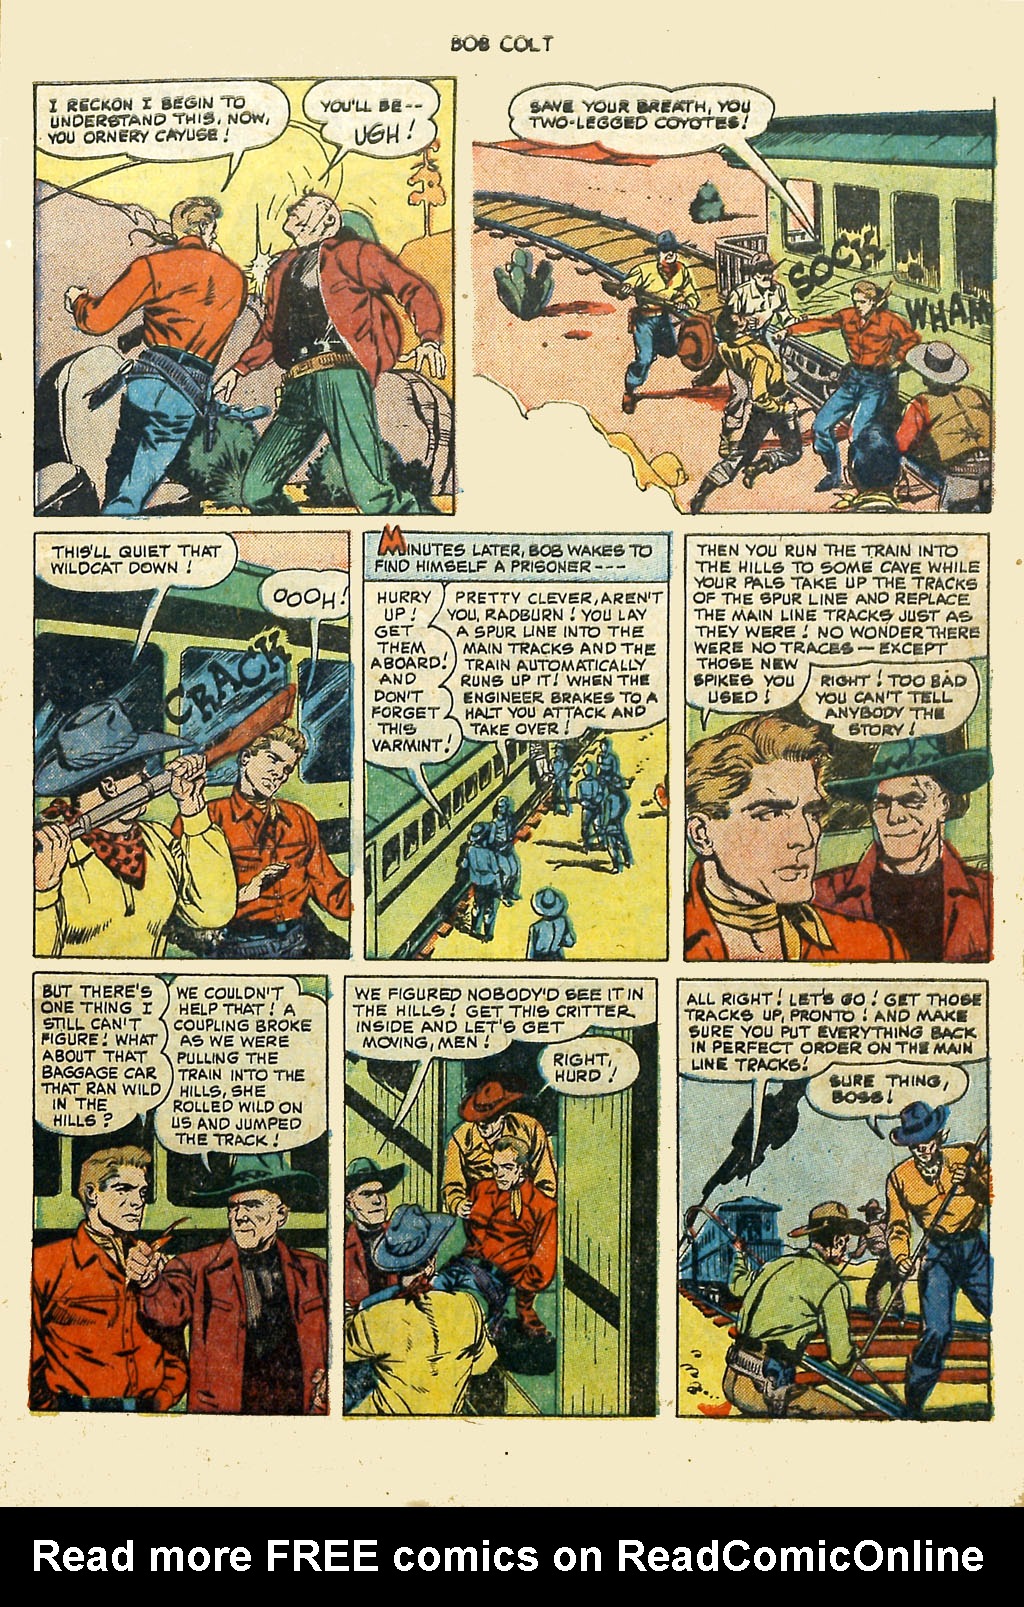 Read online Bob Colt Western comic -  Issue #2 - 9